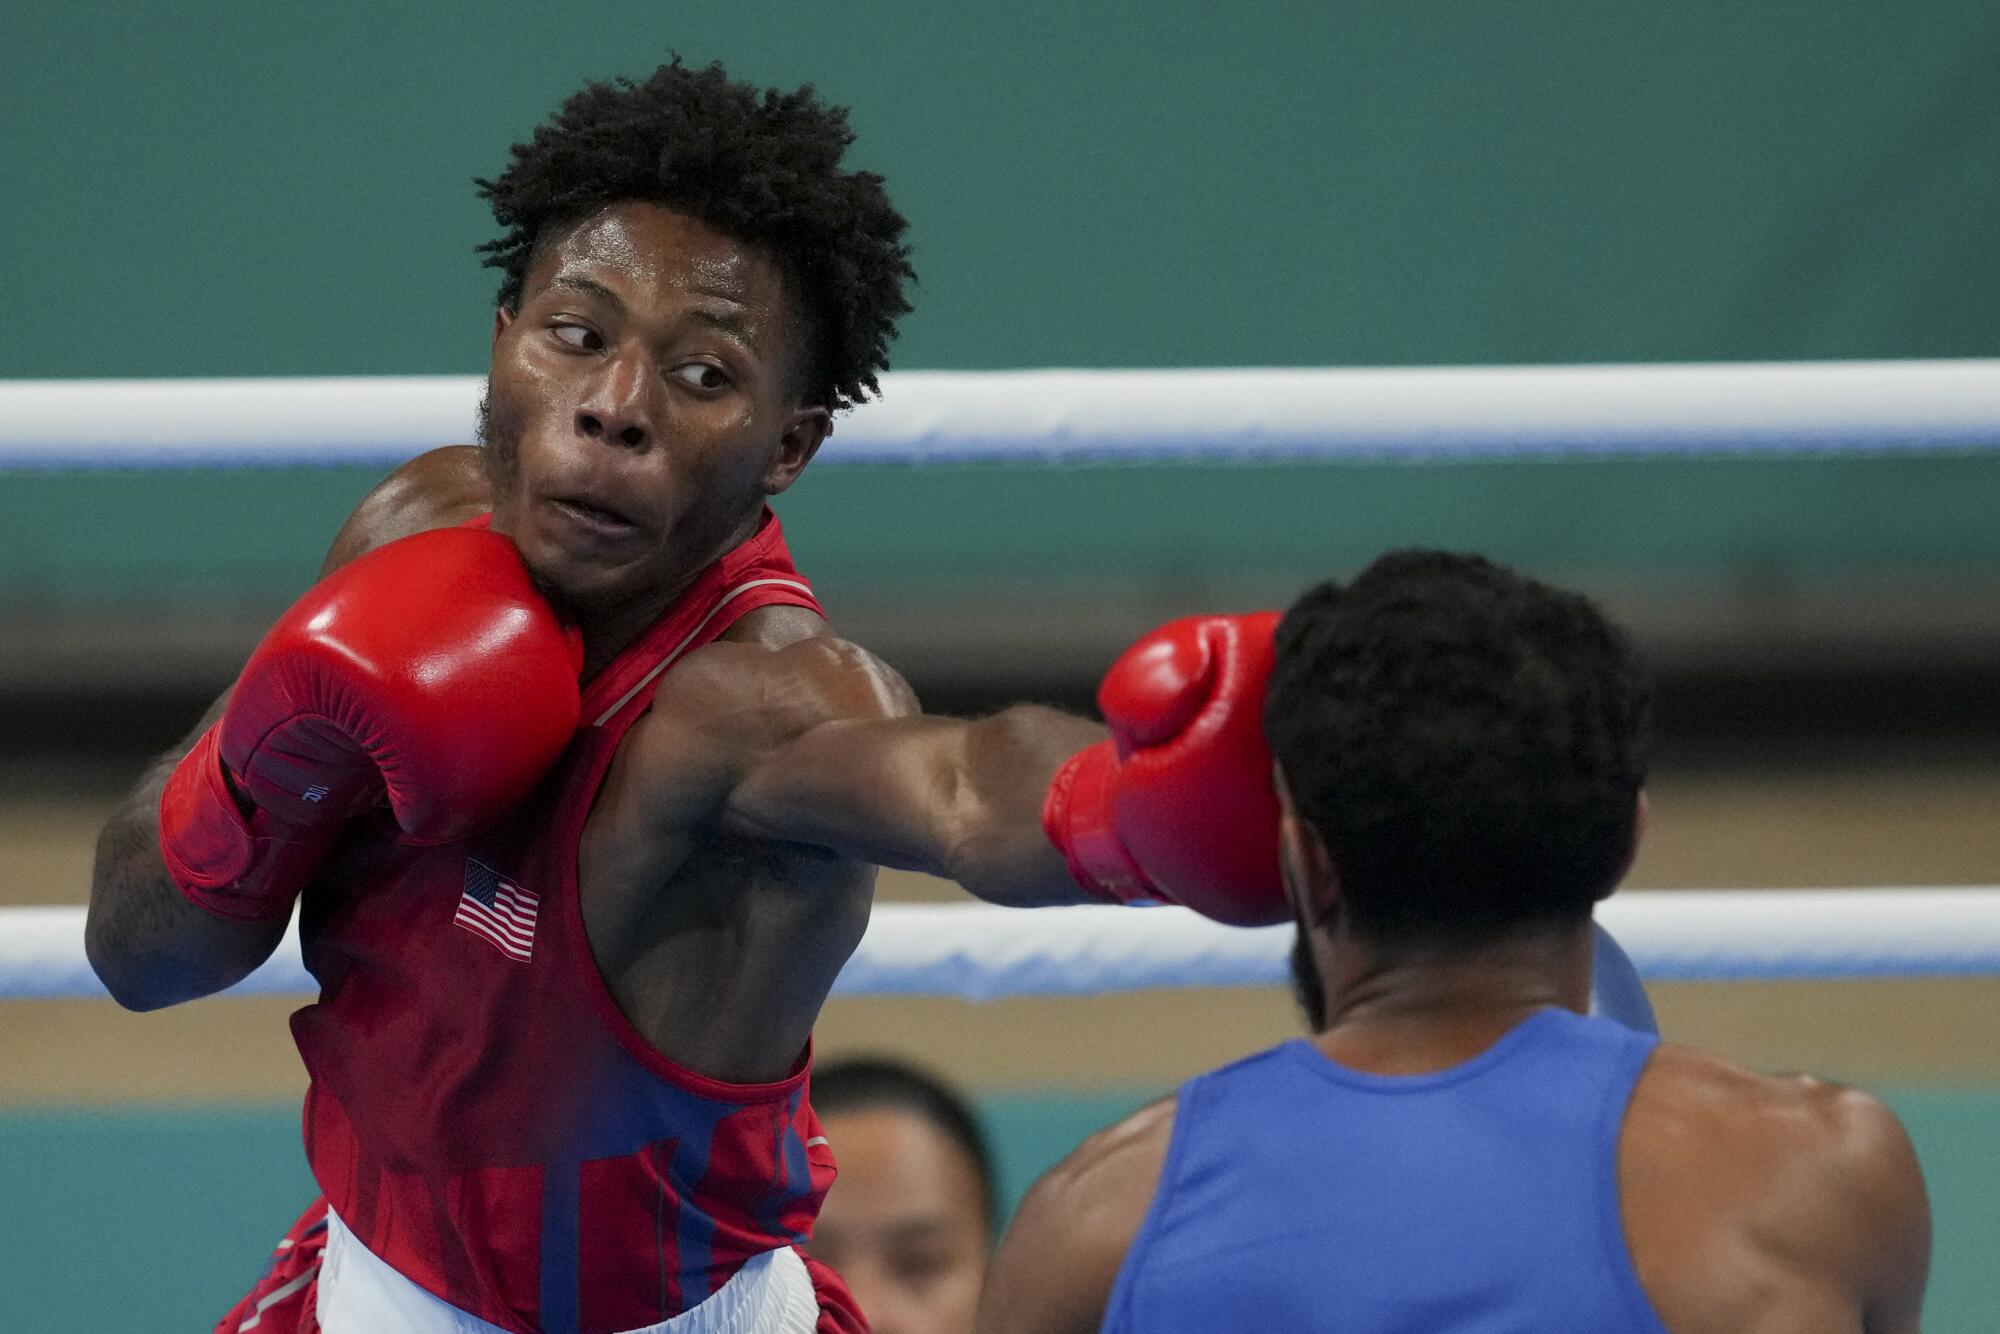 Jahmal Harvey, left, throws a punch during a match against Brazil's Luiz Do Nascimento at the Pan American Games in October.